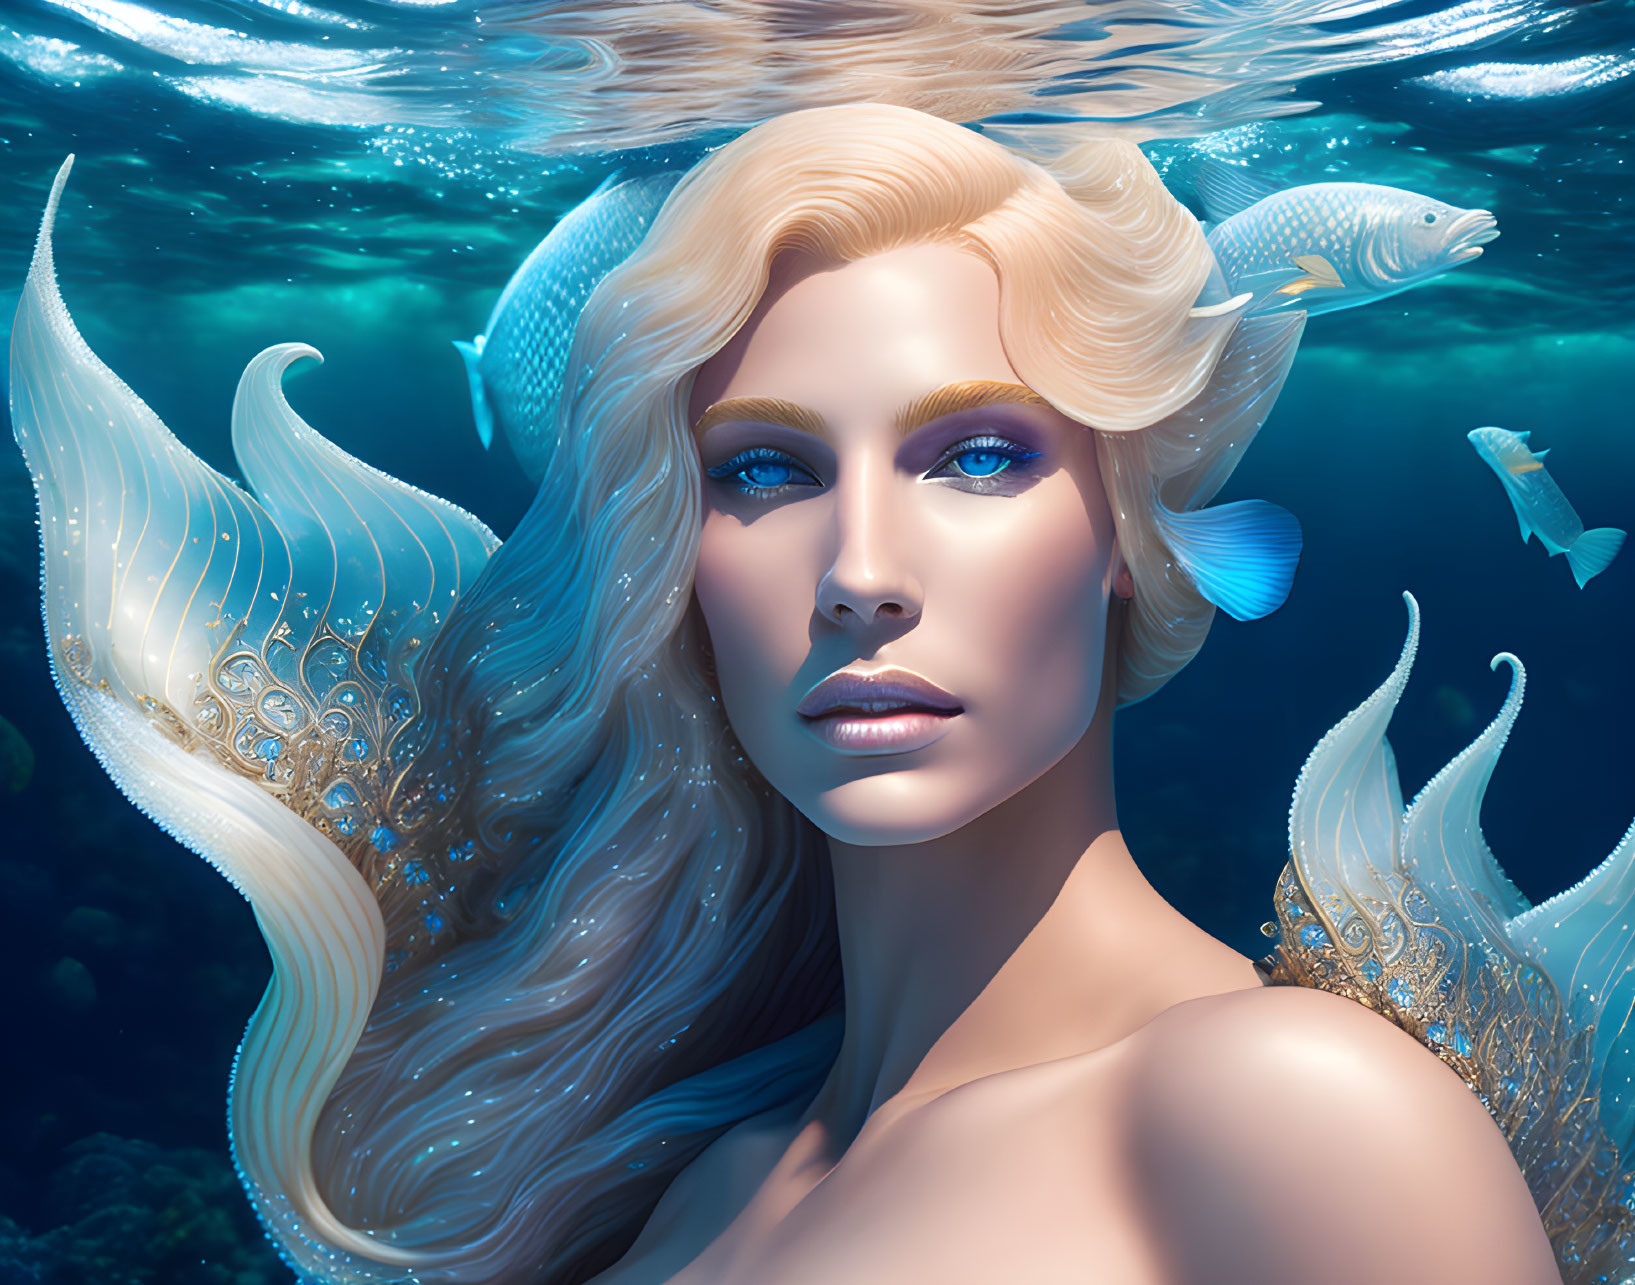 Blonde Mermaid with Blue Eyes Surrounded by Fish